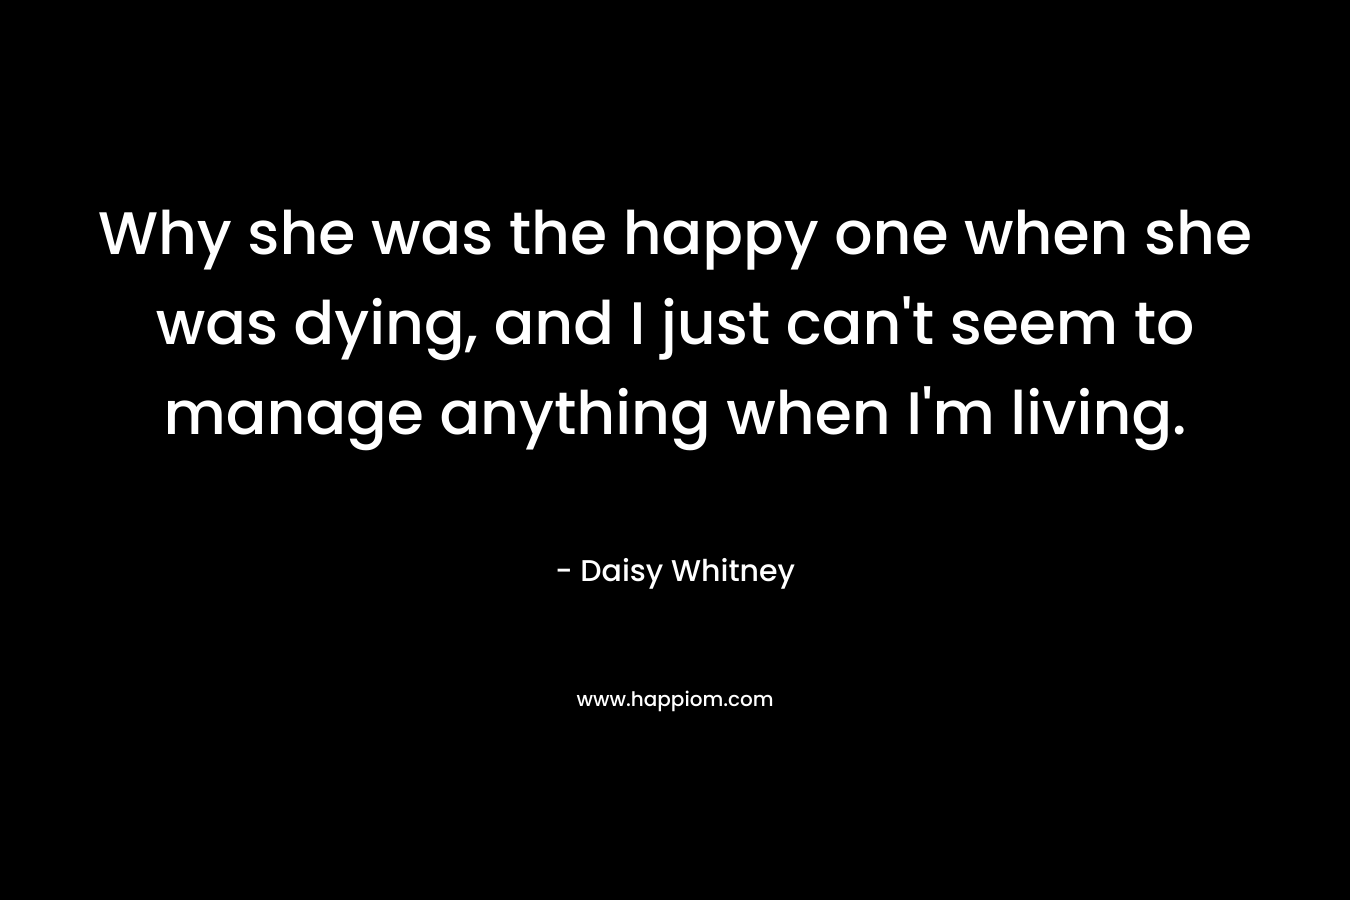 Why she was the happy one when she was dying, and I just can't seem to manage anything when I'm living.